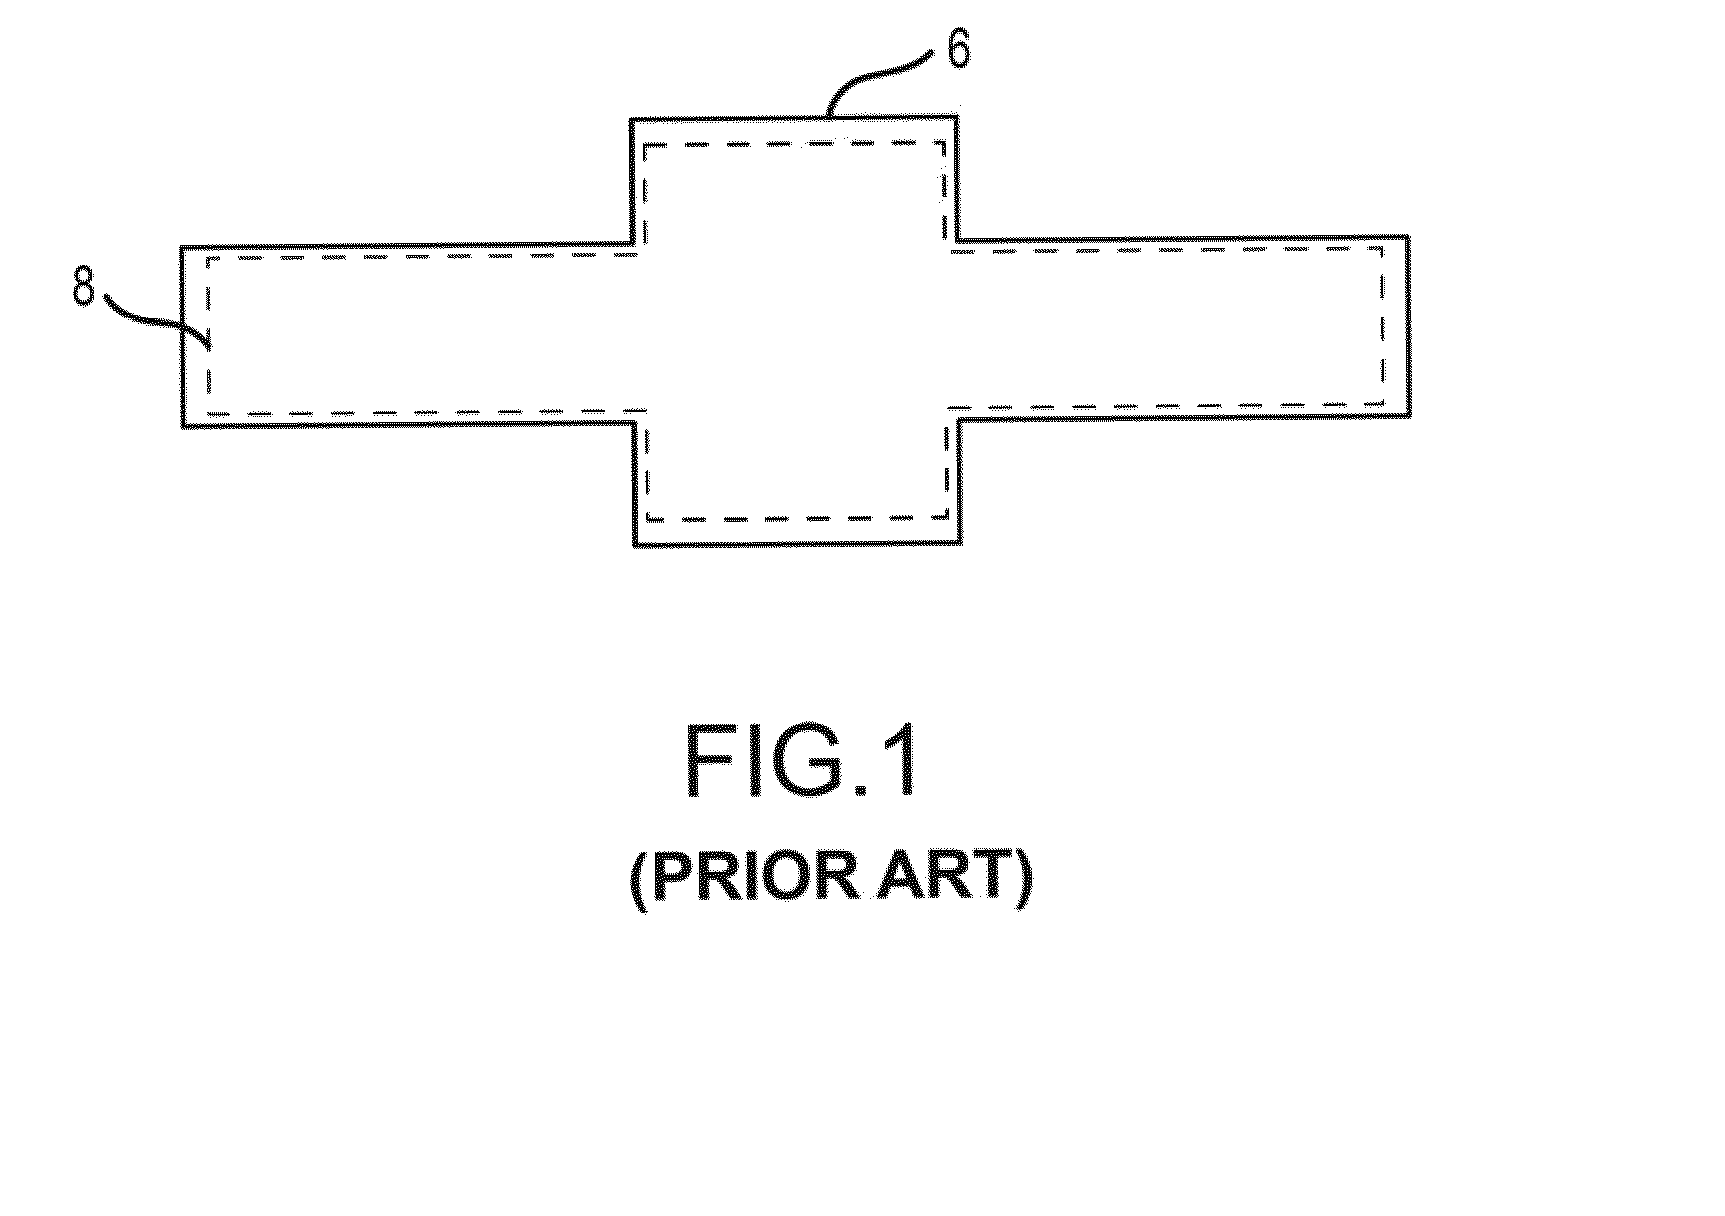 Method of manufacture of one-piece composite parts with a polymer form that transitions between its glassy and elastomeric states